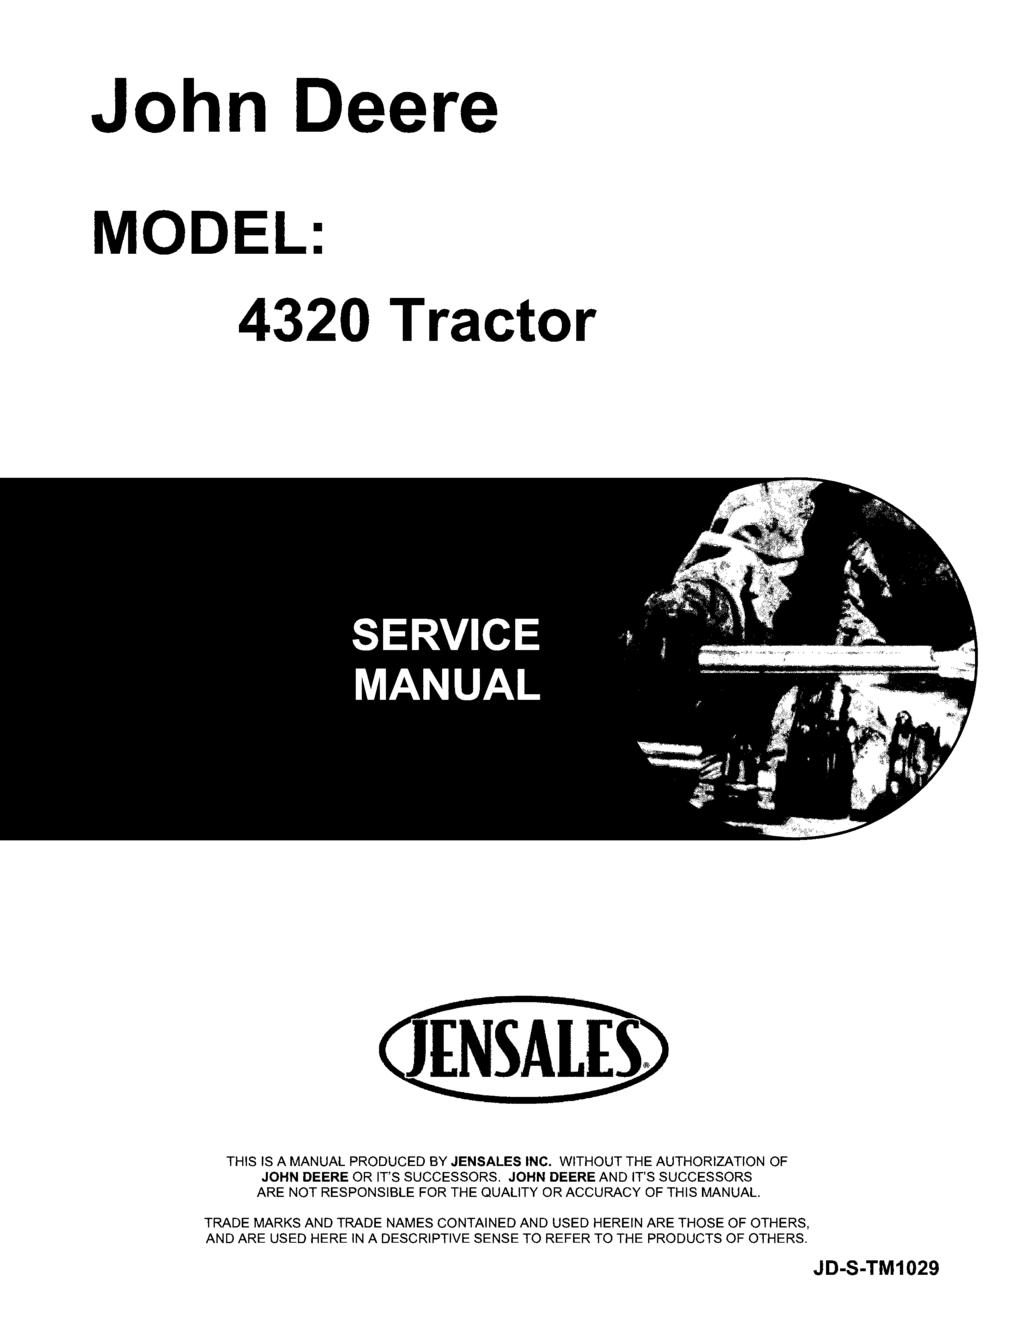 John Deere MODEL: 4320 Tractor THIS IS A MANUAL PRODUCED BY JENSALES INC. WITHOUT THE AUTHORIZATION OF JOHN DEERE OR IT'S SUCCESSORS.